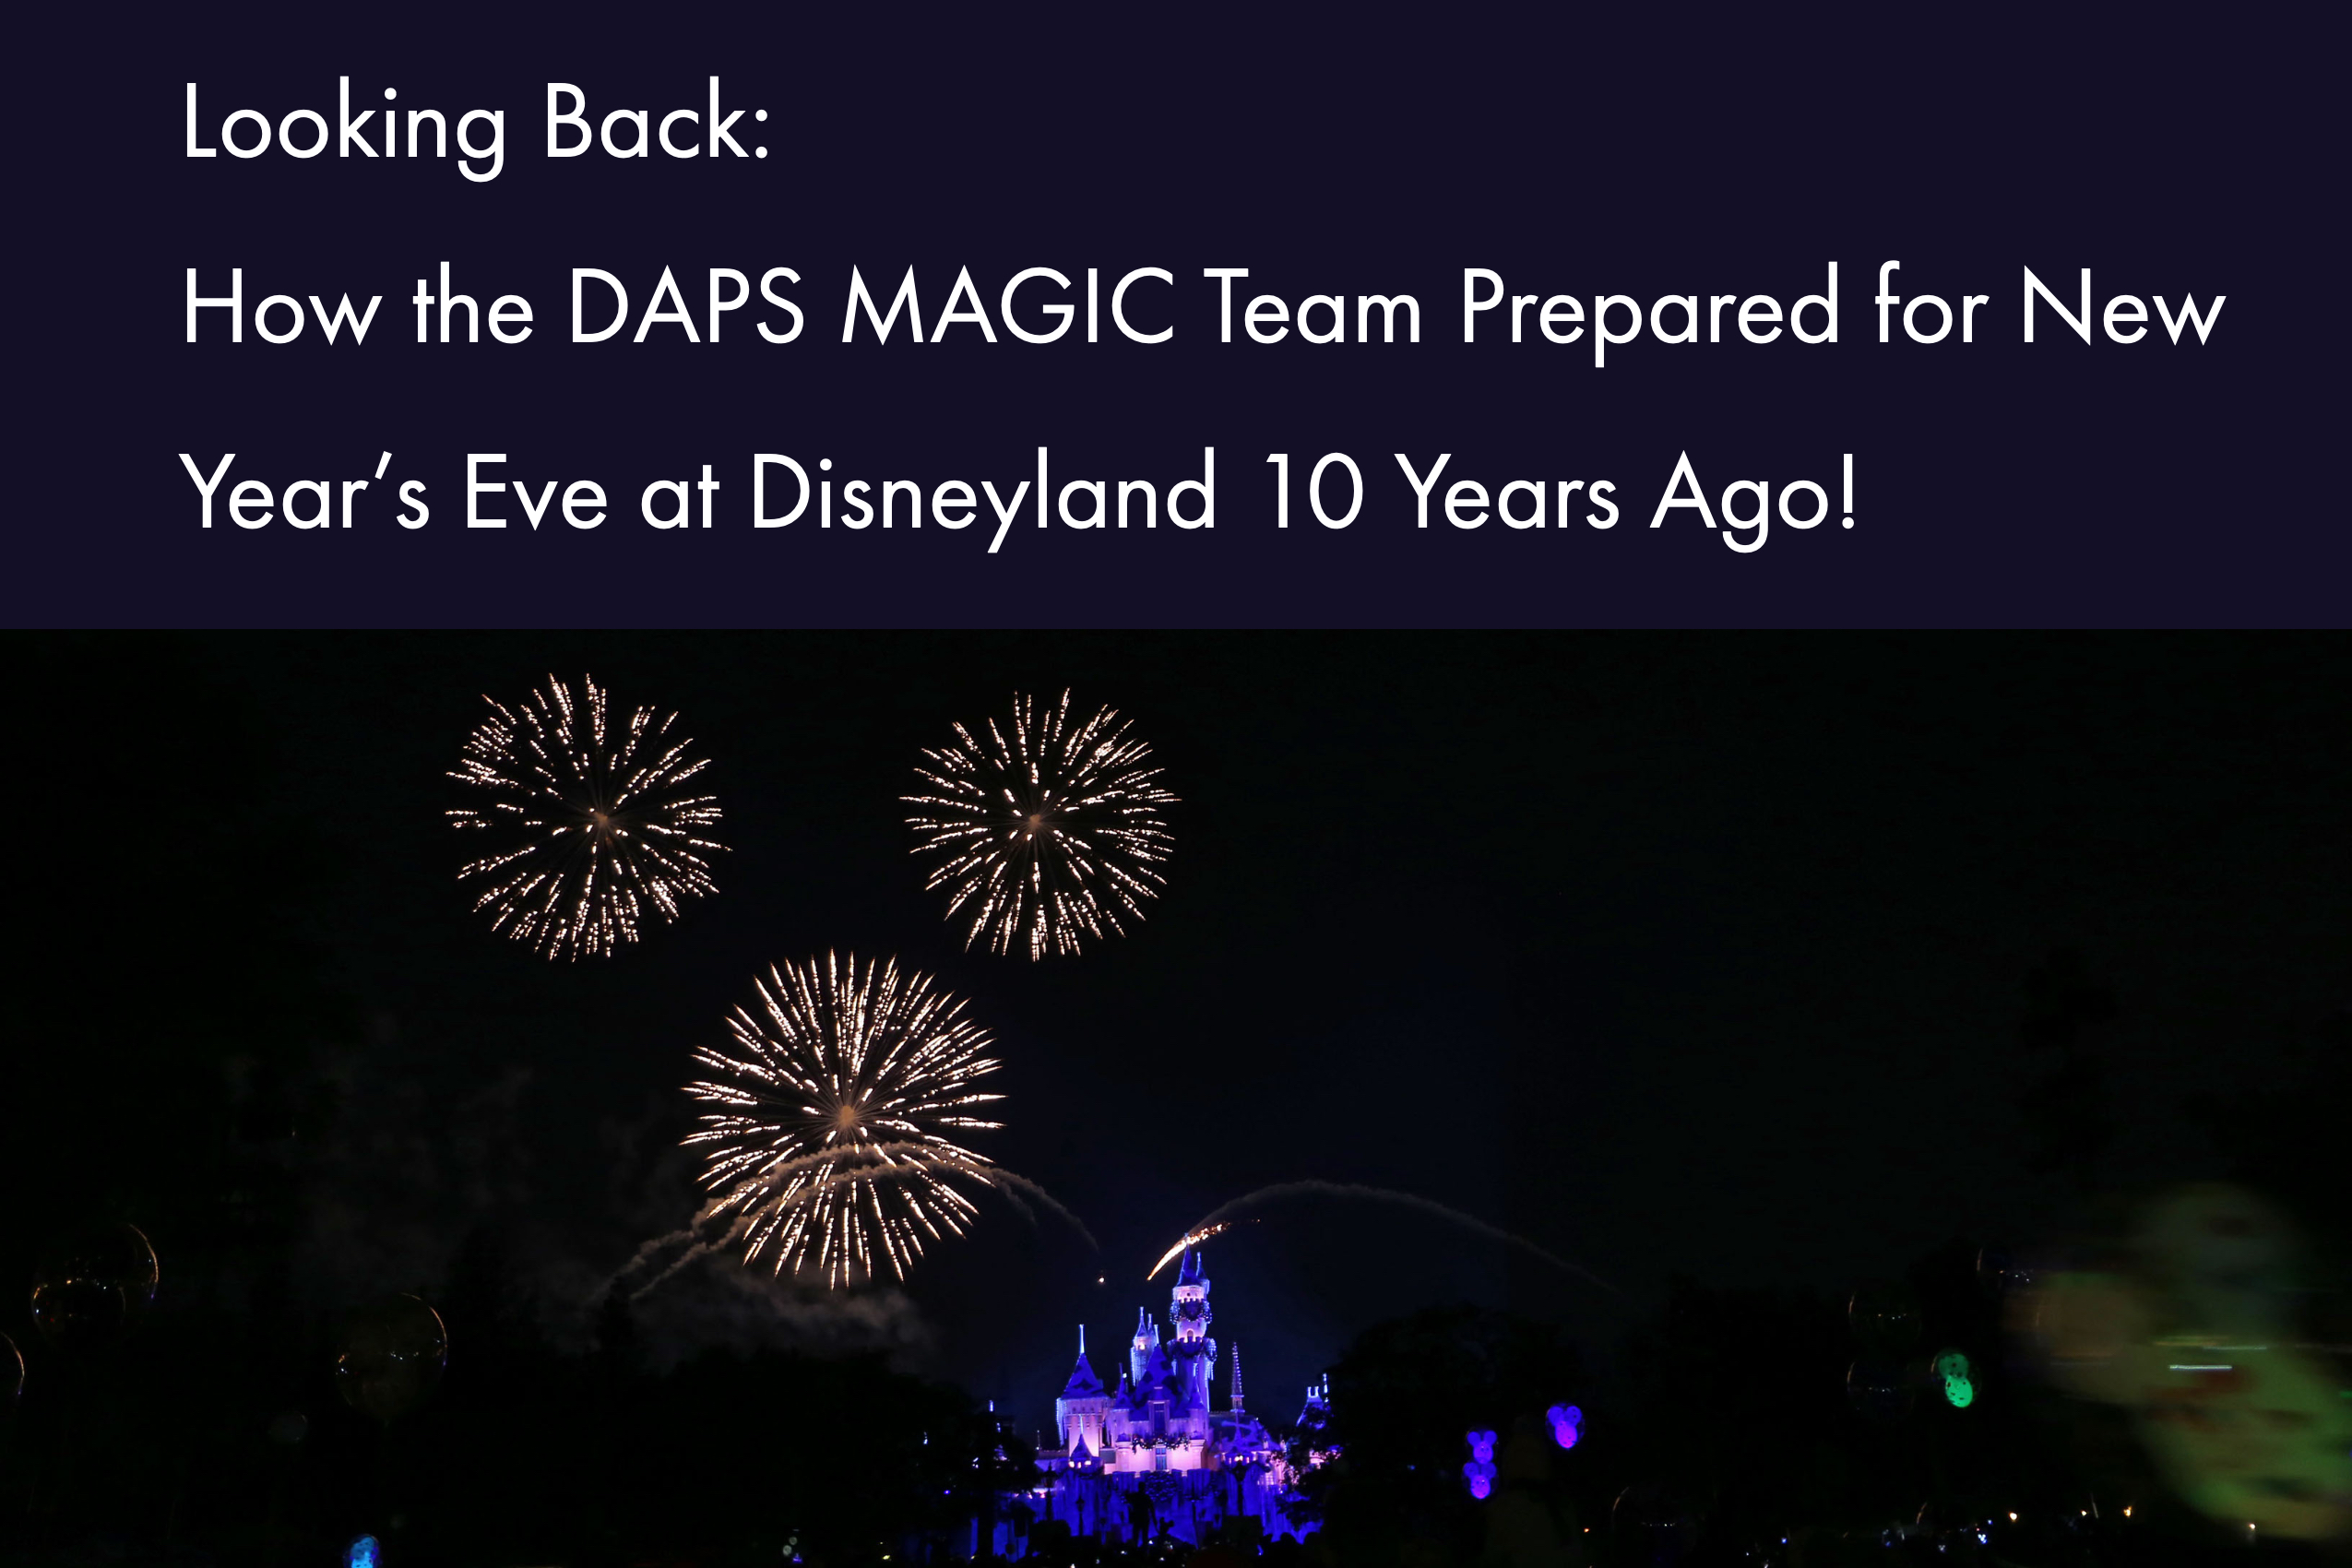 Looking Back: How the DAPS MAGIC Team Prepared for New Year’s Eve at Disneyland 10 Years Ago!